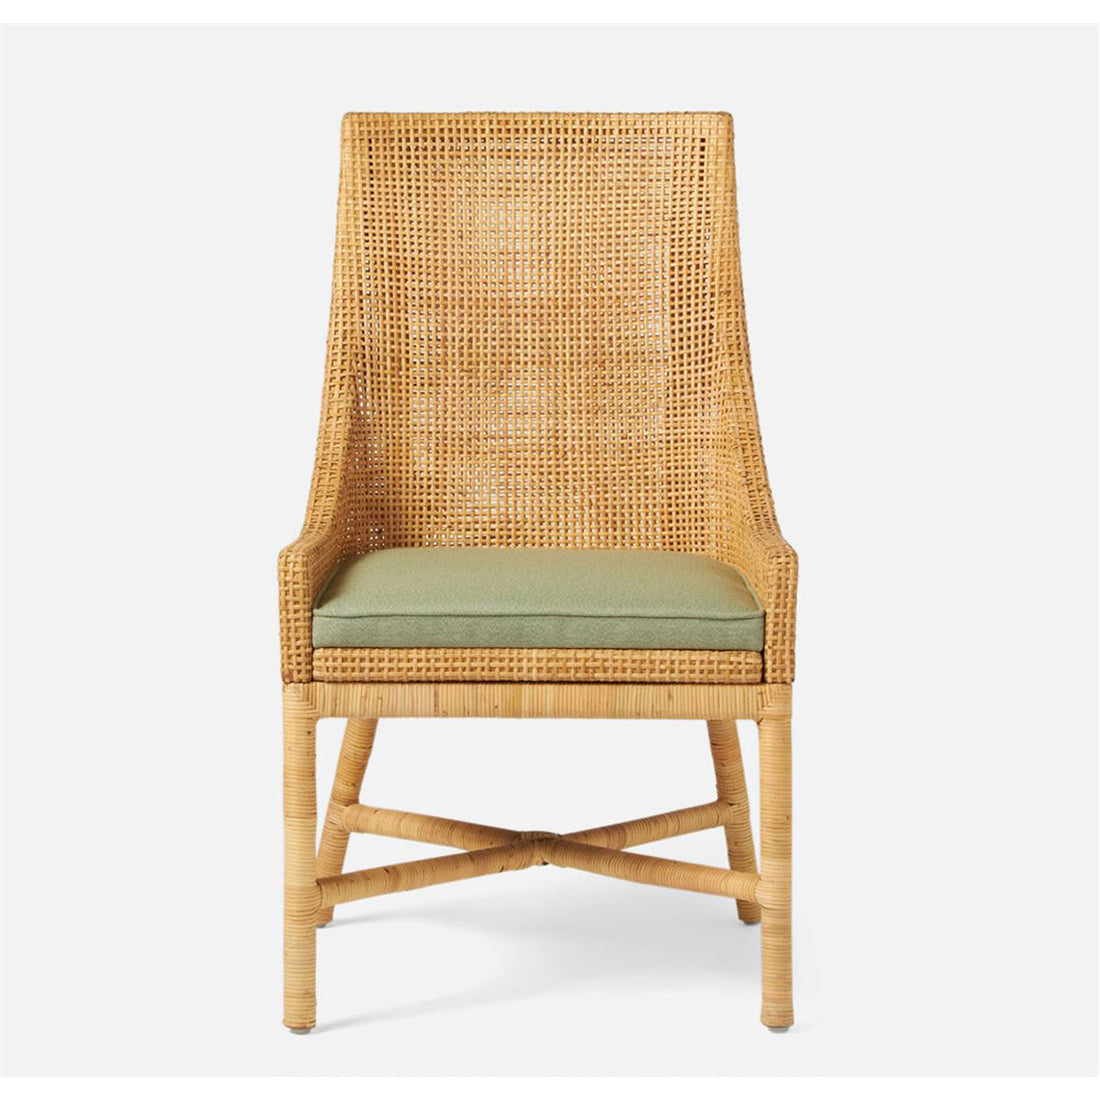 Made Goods Isla Woven Rattan Dining Chair in Lambro Boucle